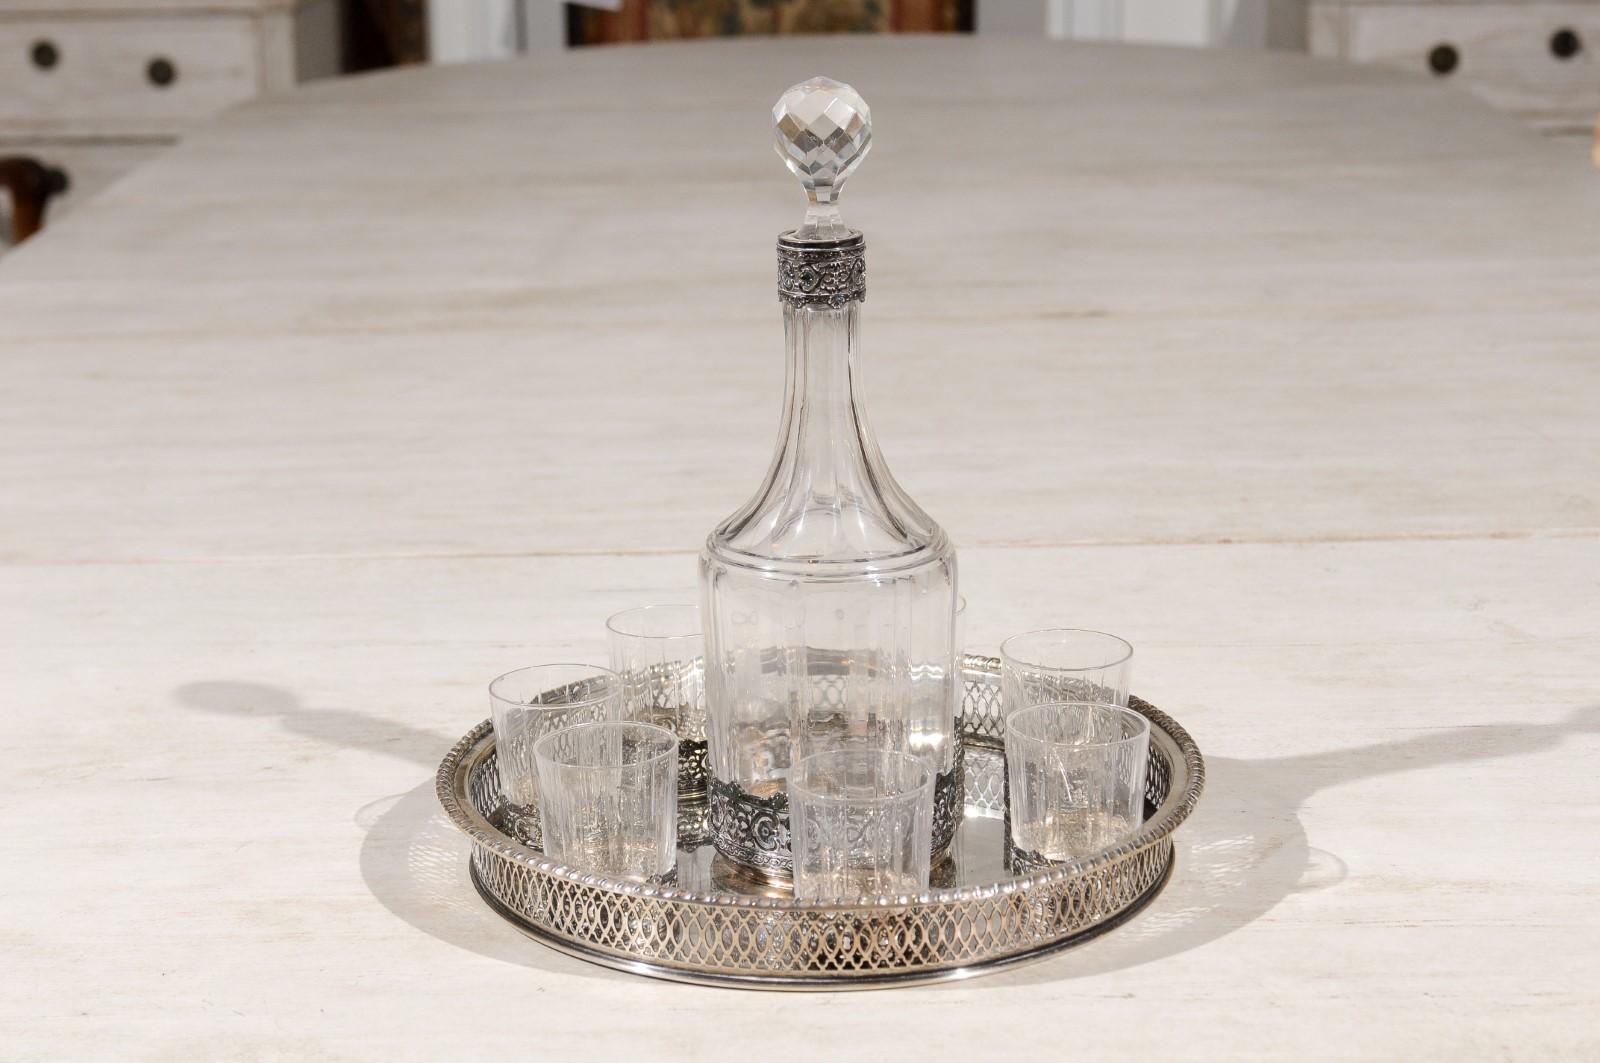 An English silver and crystal decanter set from the 19th century, with seven glasses, a decanter and silver platter. Born in England during the 19th century, this exquisite set features a 3.5 inches diameter x 10.75 inches high crystal decanter,